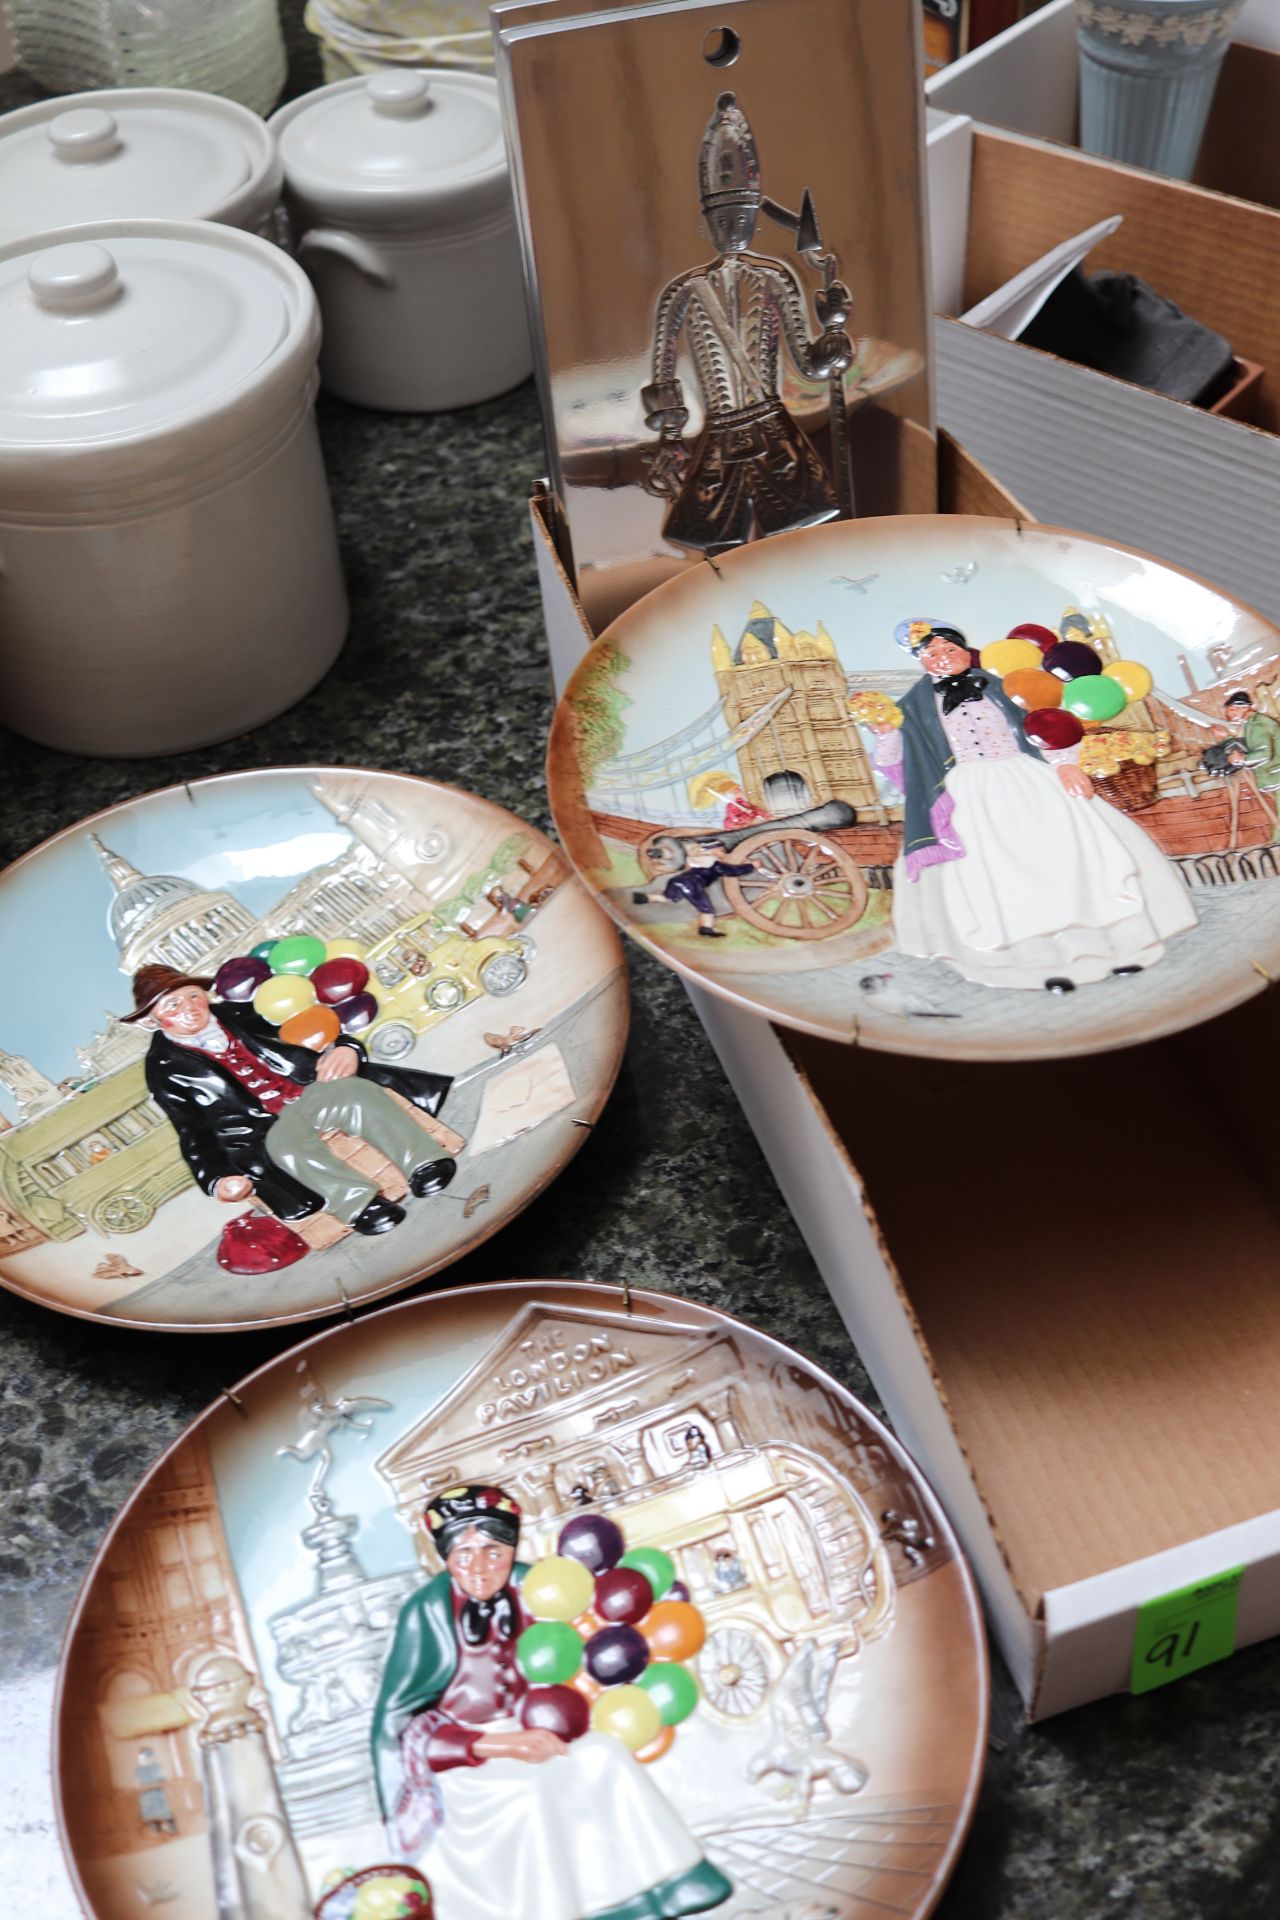 Three decorative plates by Royal Doulton, "Balloon Man", "Biddy Penny Farthing" and "The Old Balloon